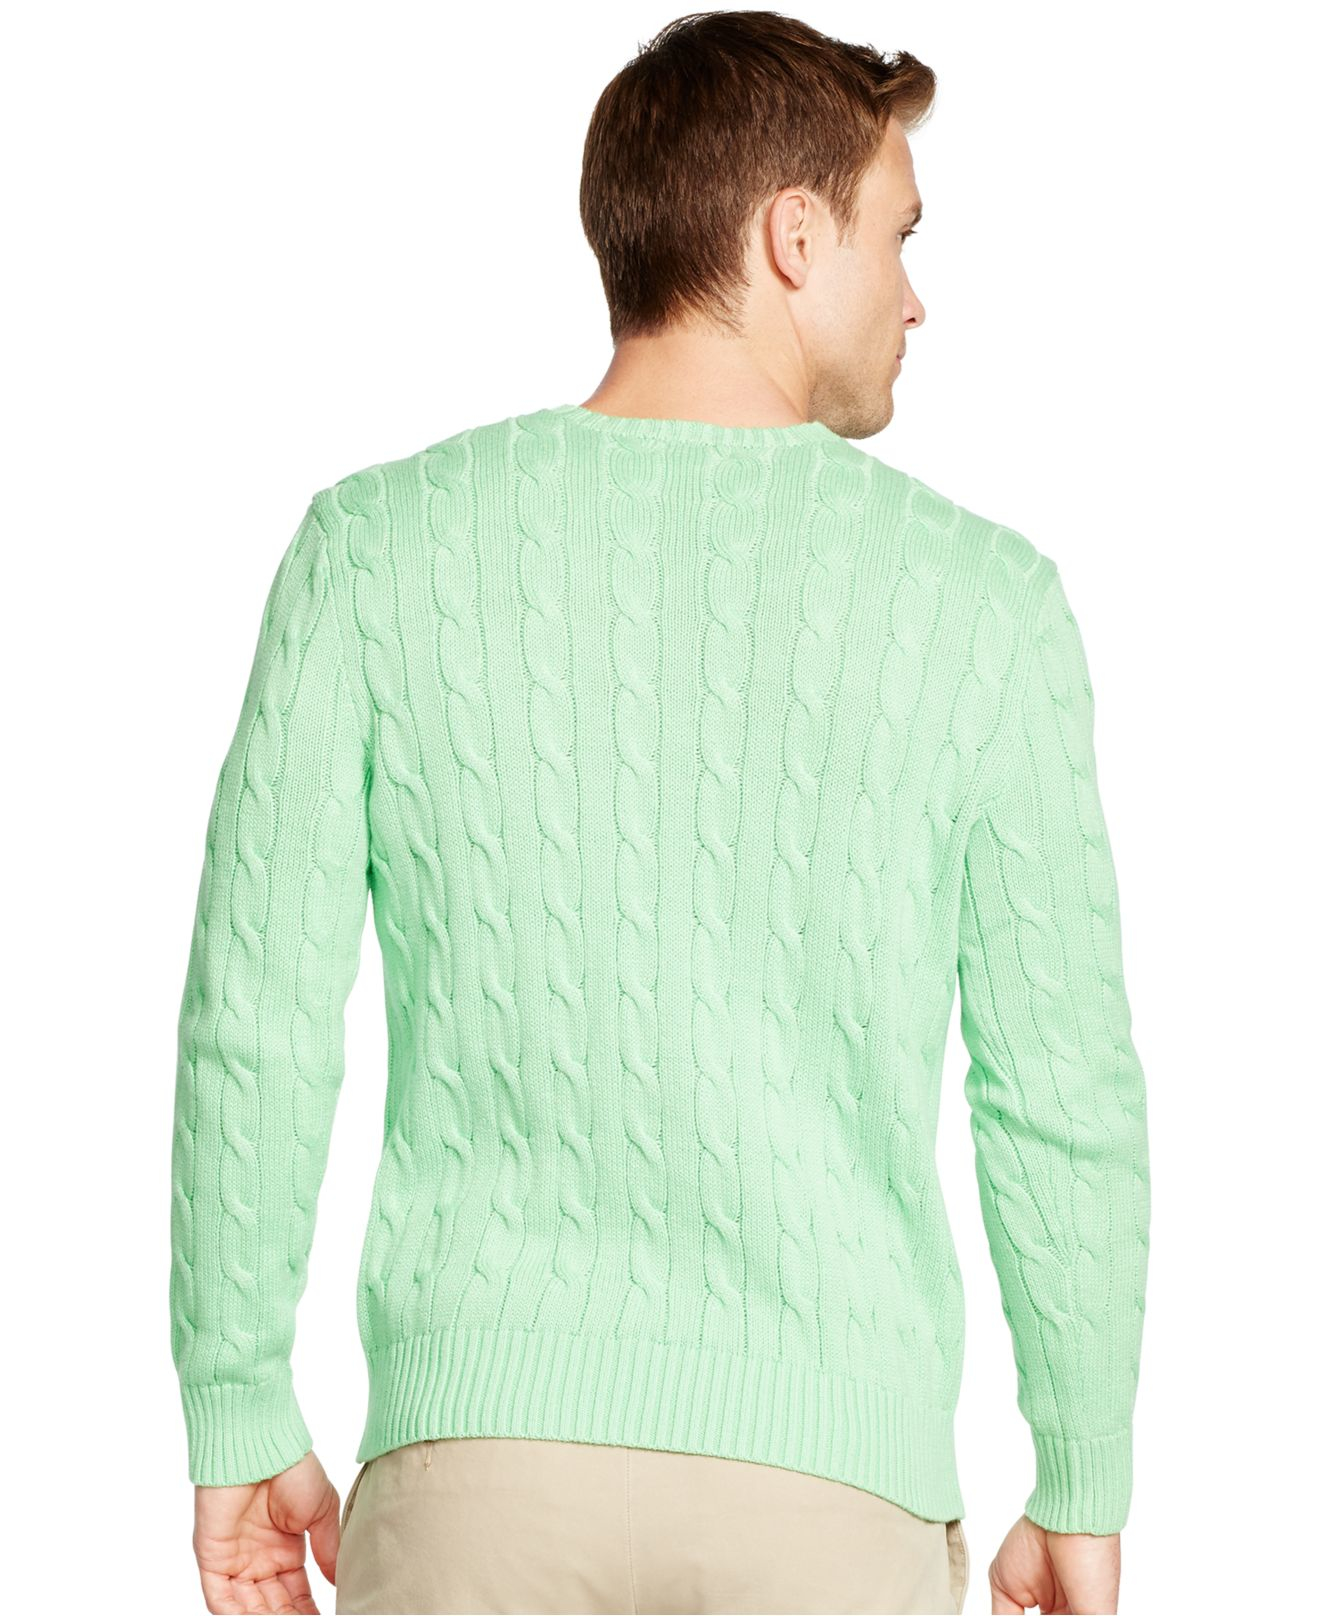 Polo Ralph Lauren Cable-knit Crewneck Sweater in Green for Men - Lyst